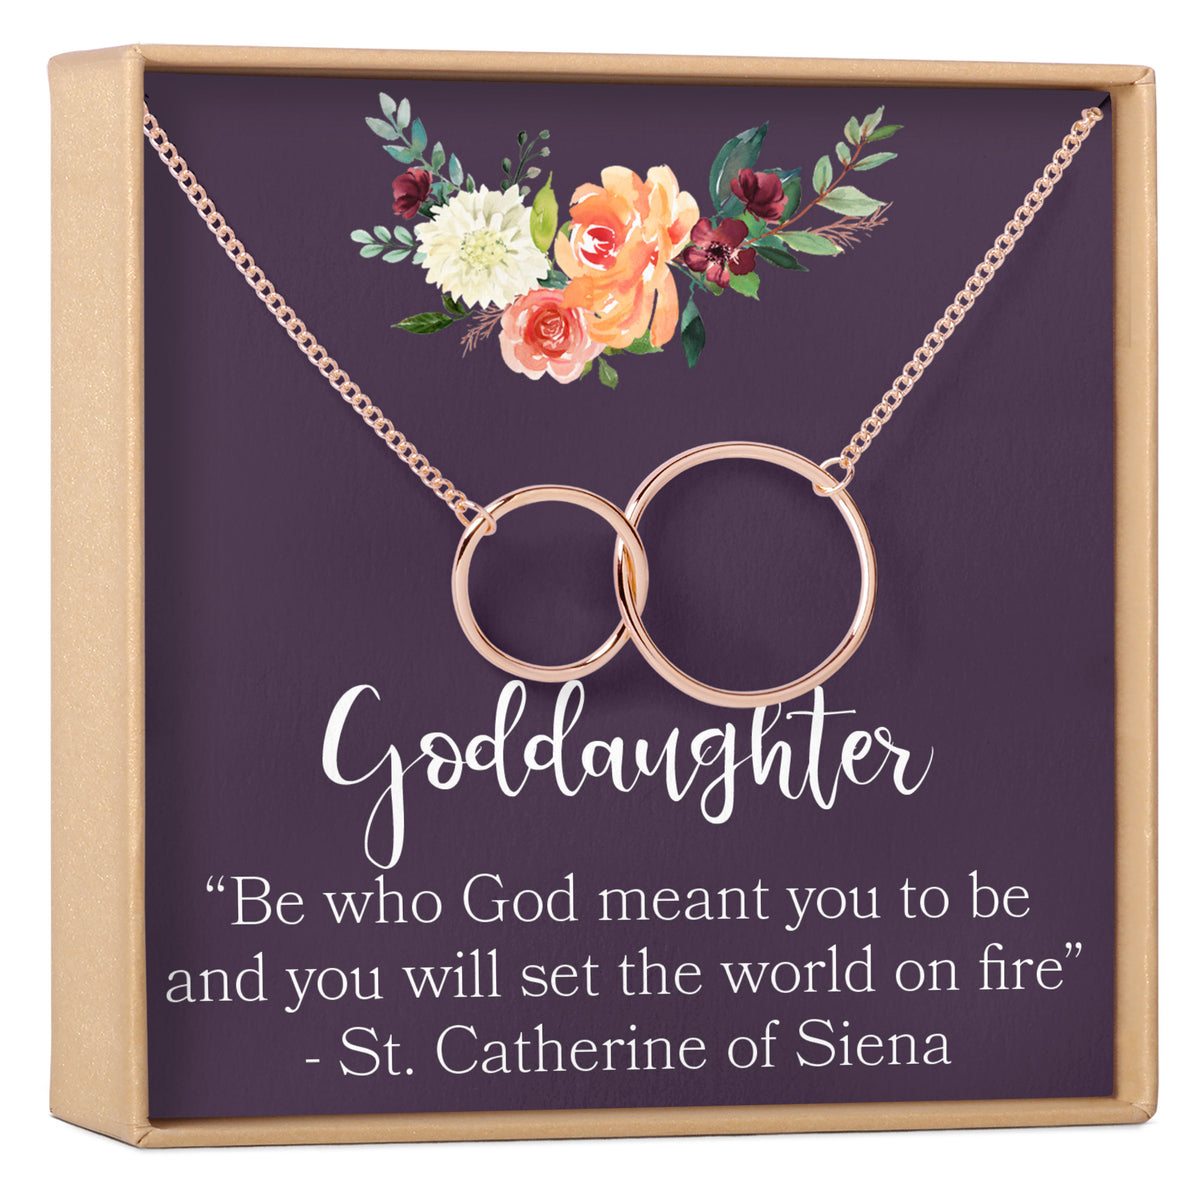 Goddaughter Necklace - Dear Ava, Jewelry / Necklaces / Pendants